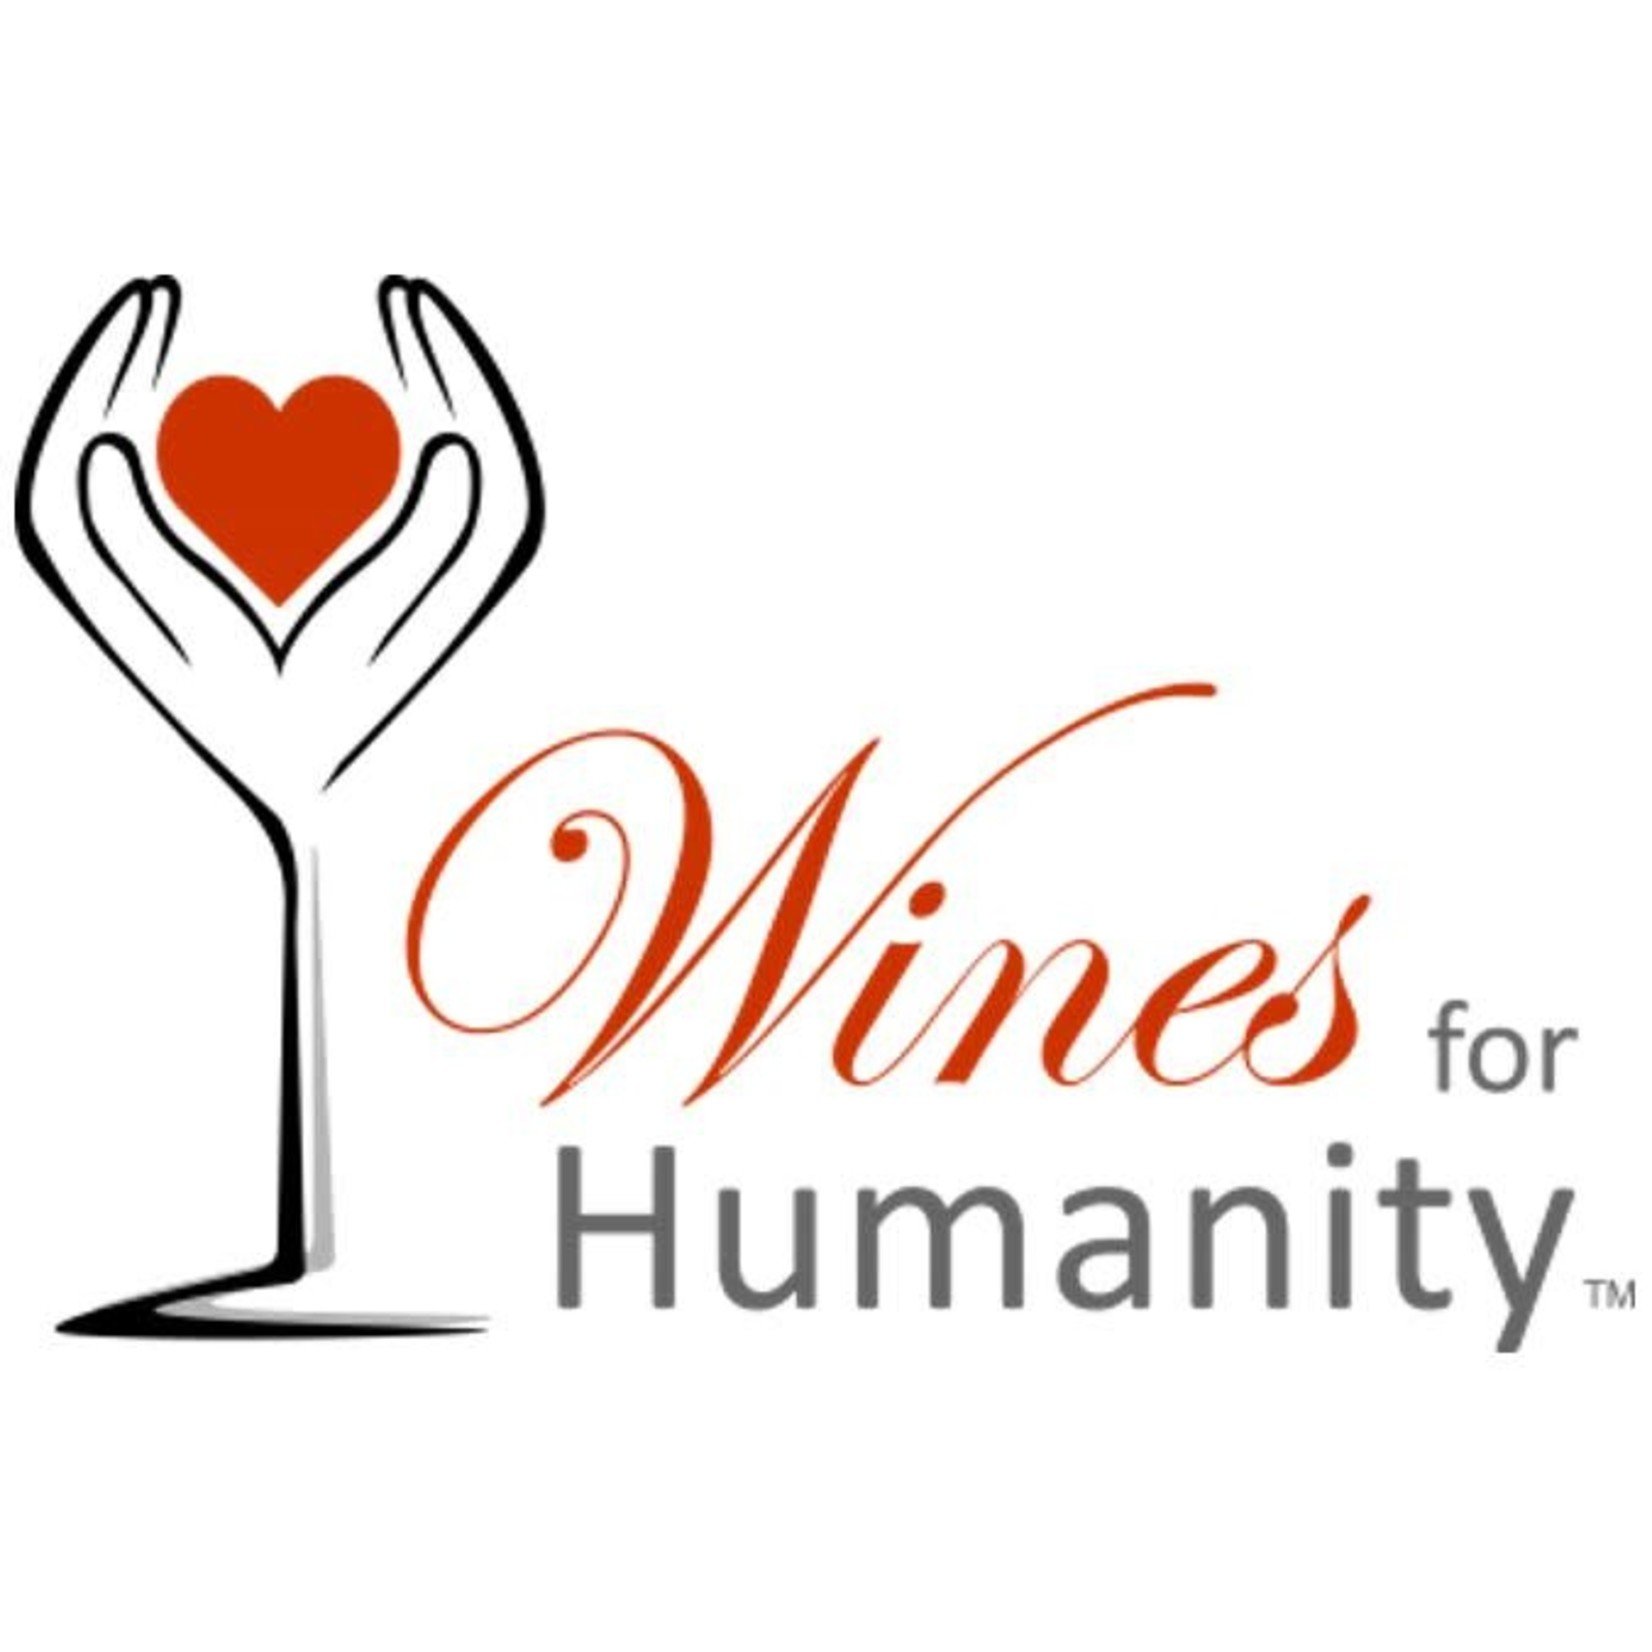 Wines for Humanity-Naperville Wines for Humanity-Naperville $350.00 (6) Bottle In-Home Wine Tasting